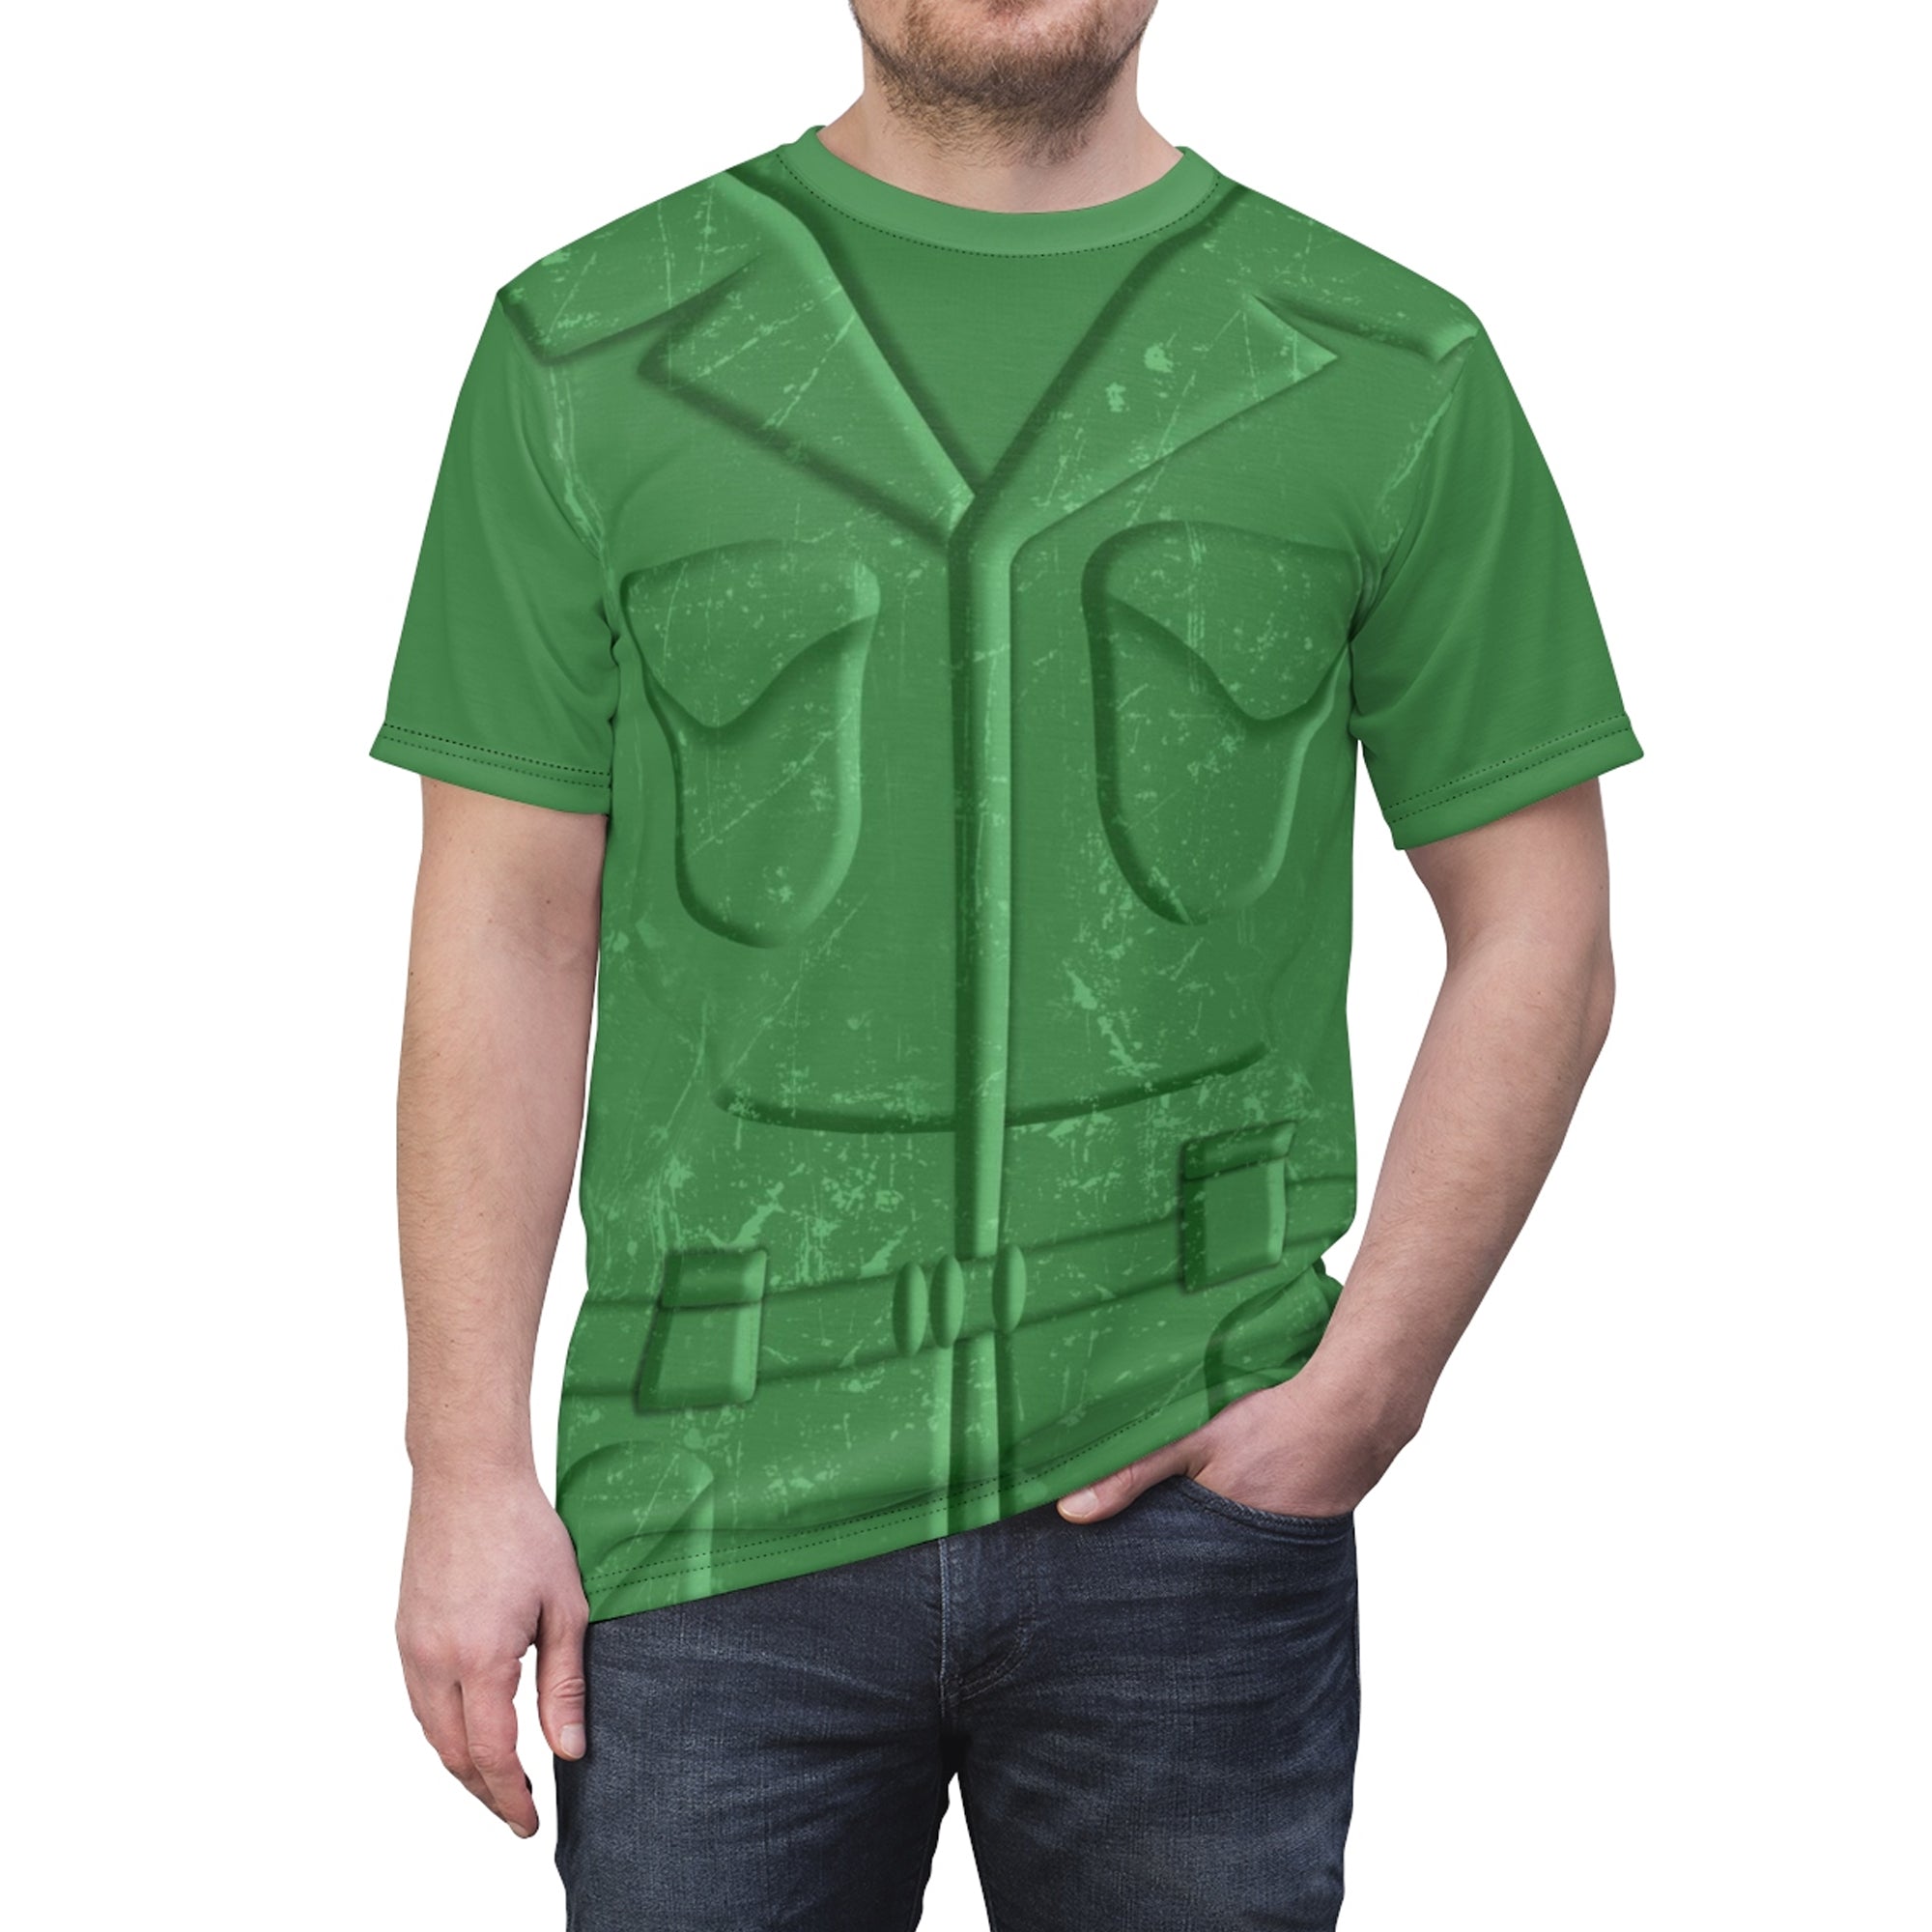 Green Army Toy Story Costume T-shirt For Men